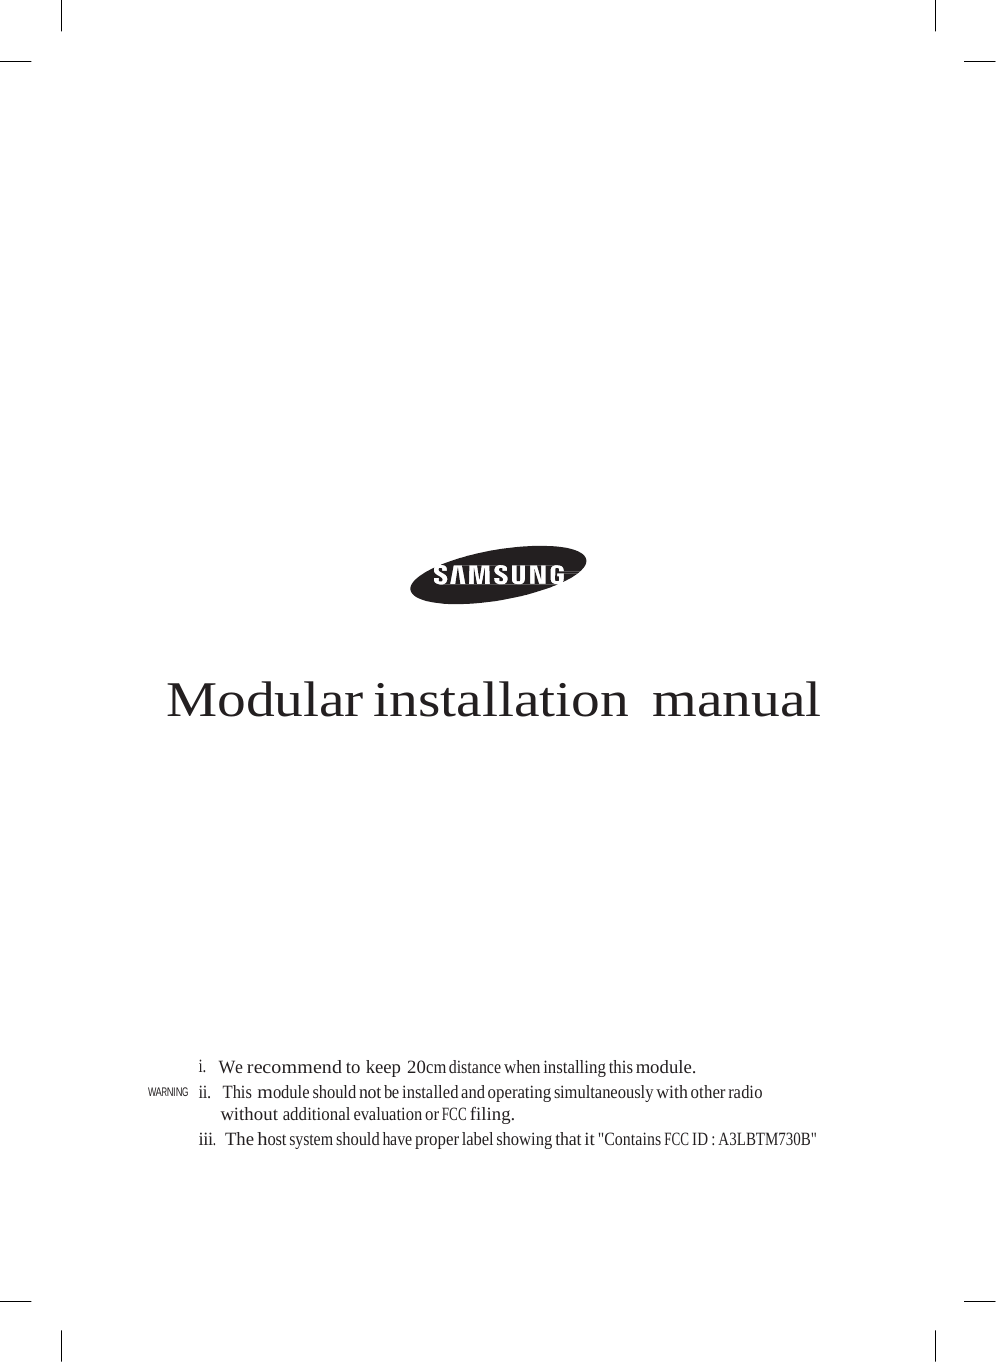                                Modular installation manual                   WARNING i.   We recommend to keep 20cm distance when installing this module. ii.  This module should not be installed and operating simultaneously with other radio without additional evaluation or FCC filing. iii.  The host system should have proper label showing that it &quot;Contains FCC ID : A3LBTM730B&quot;